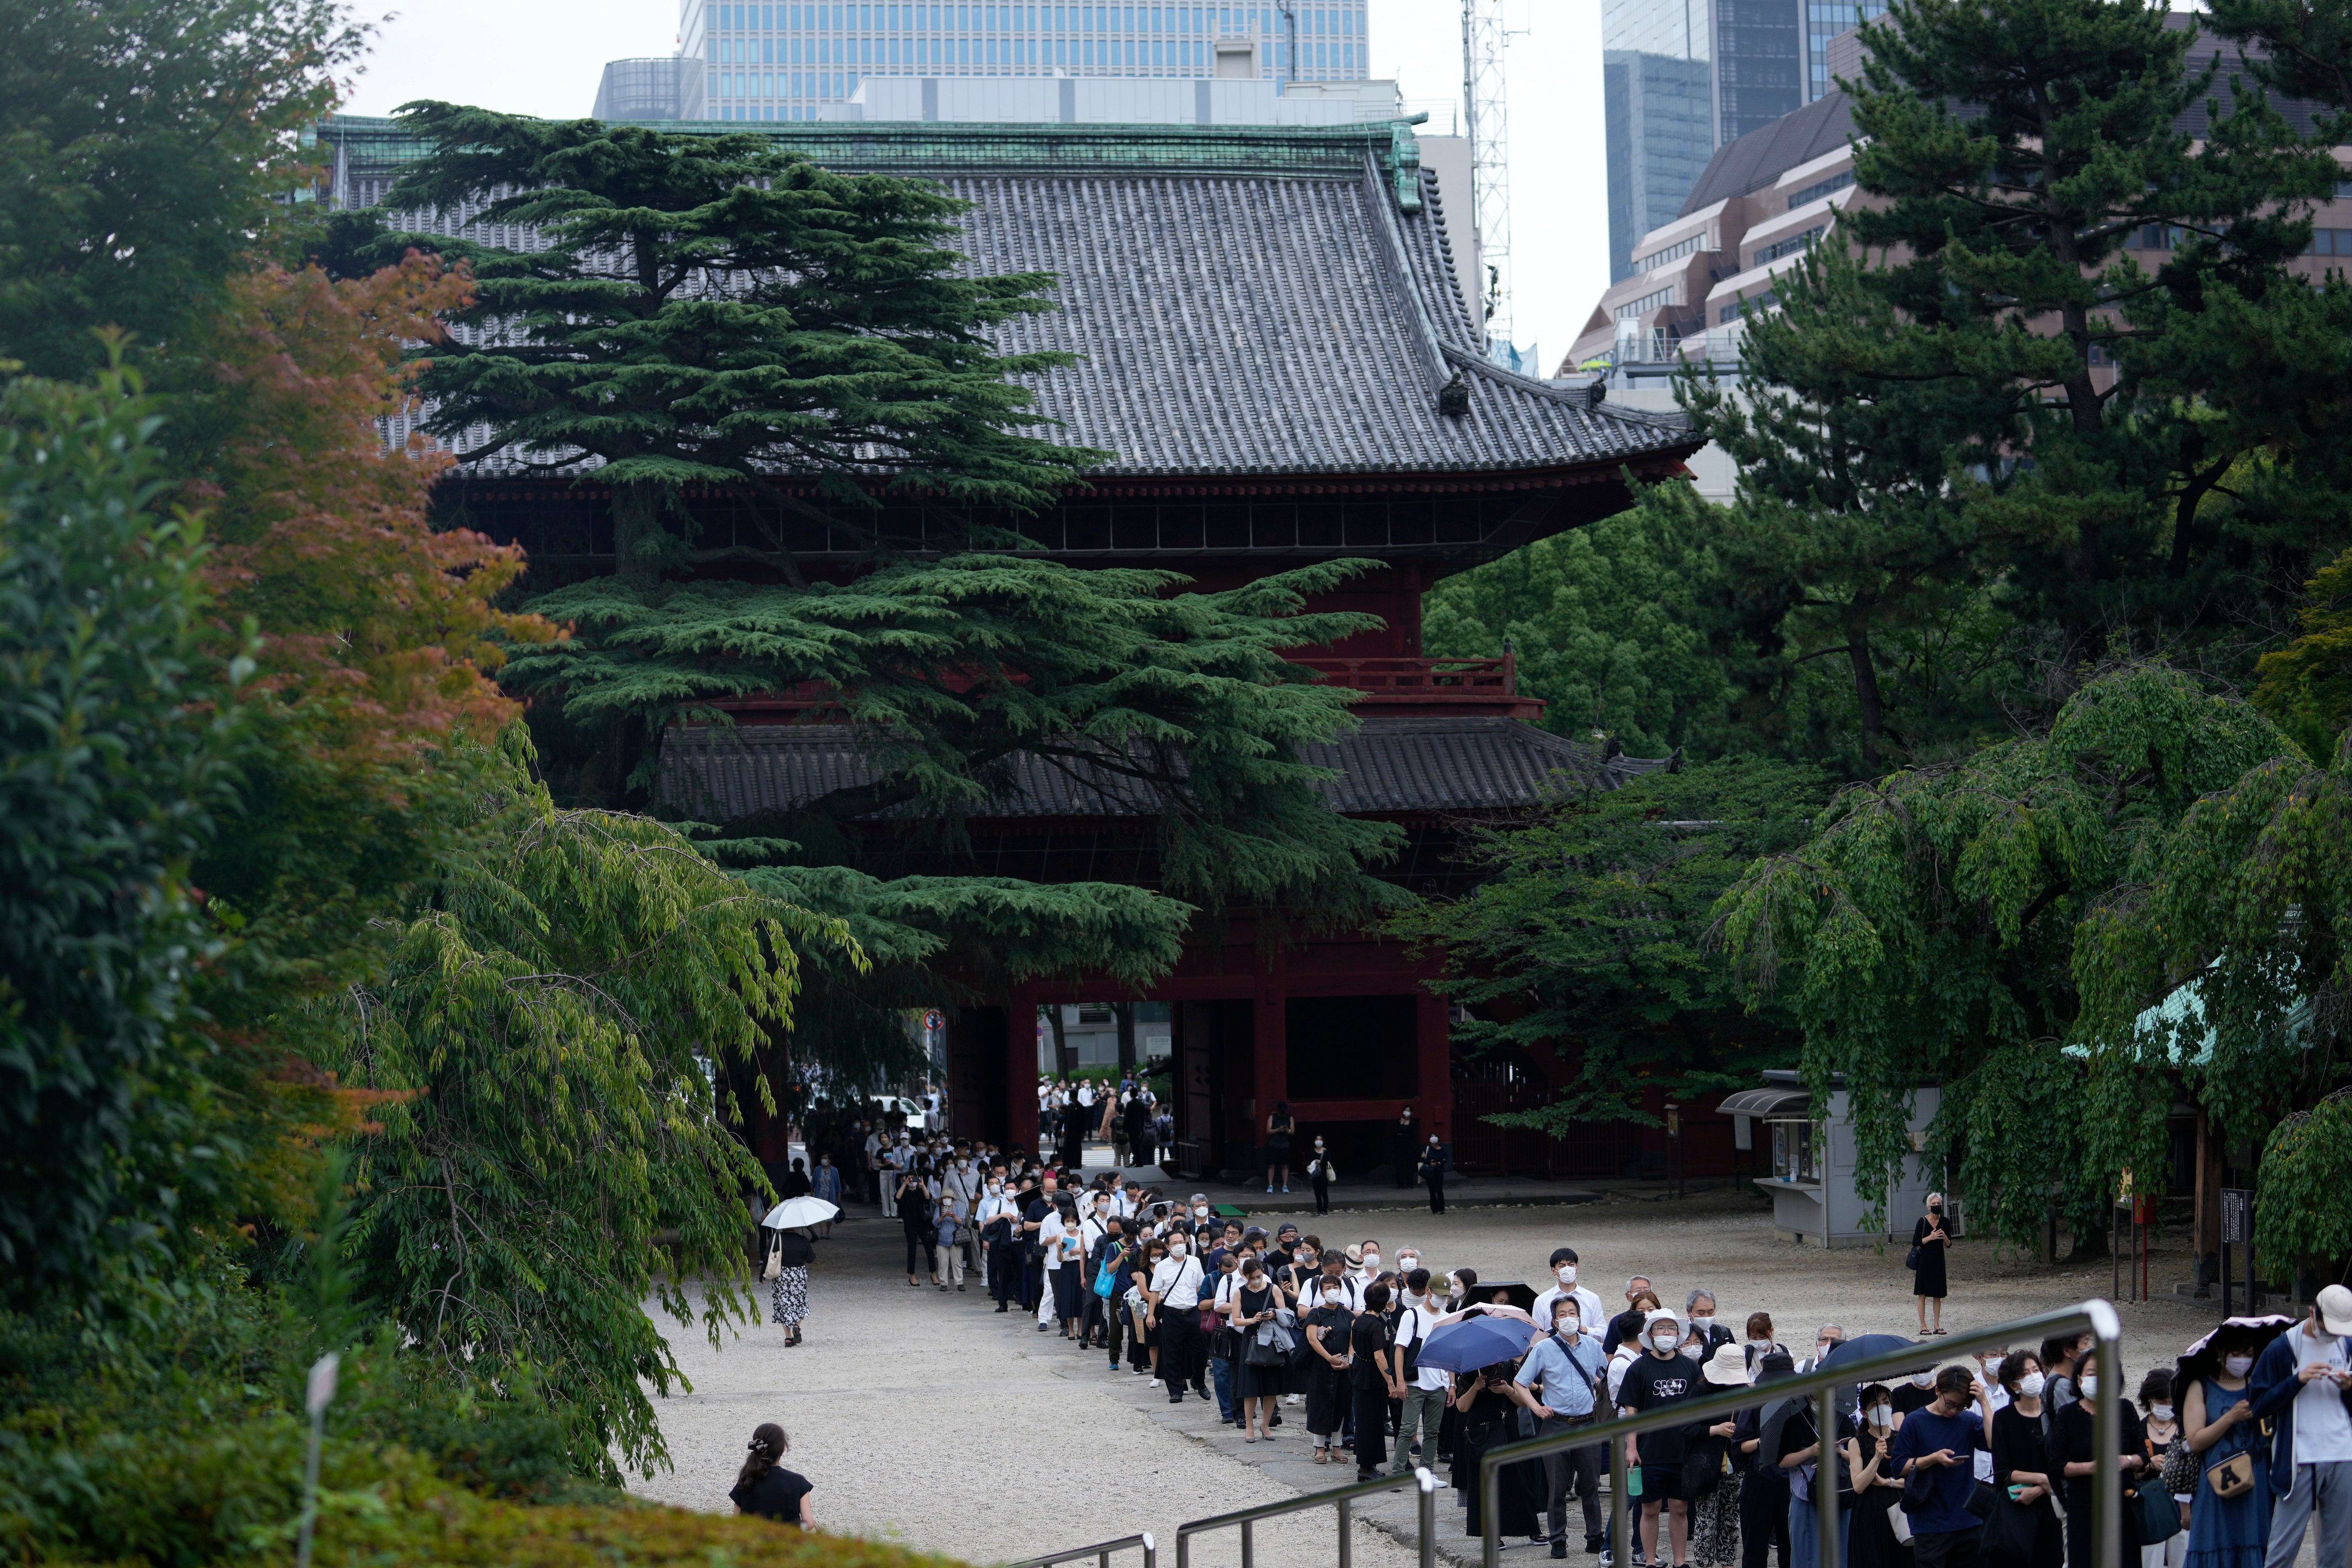 People wait in line to pay their respects to the former Japanese prime minister prior to his funeral